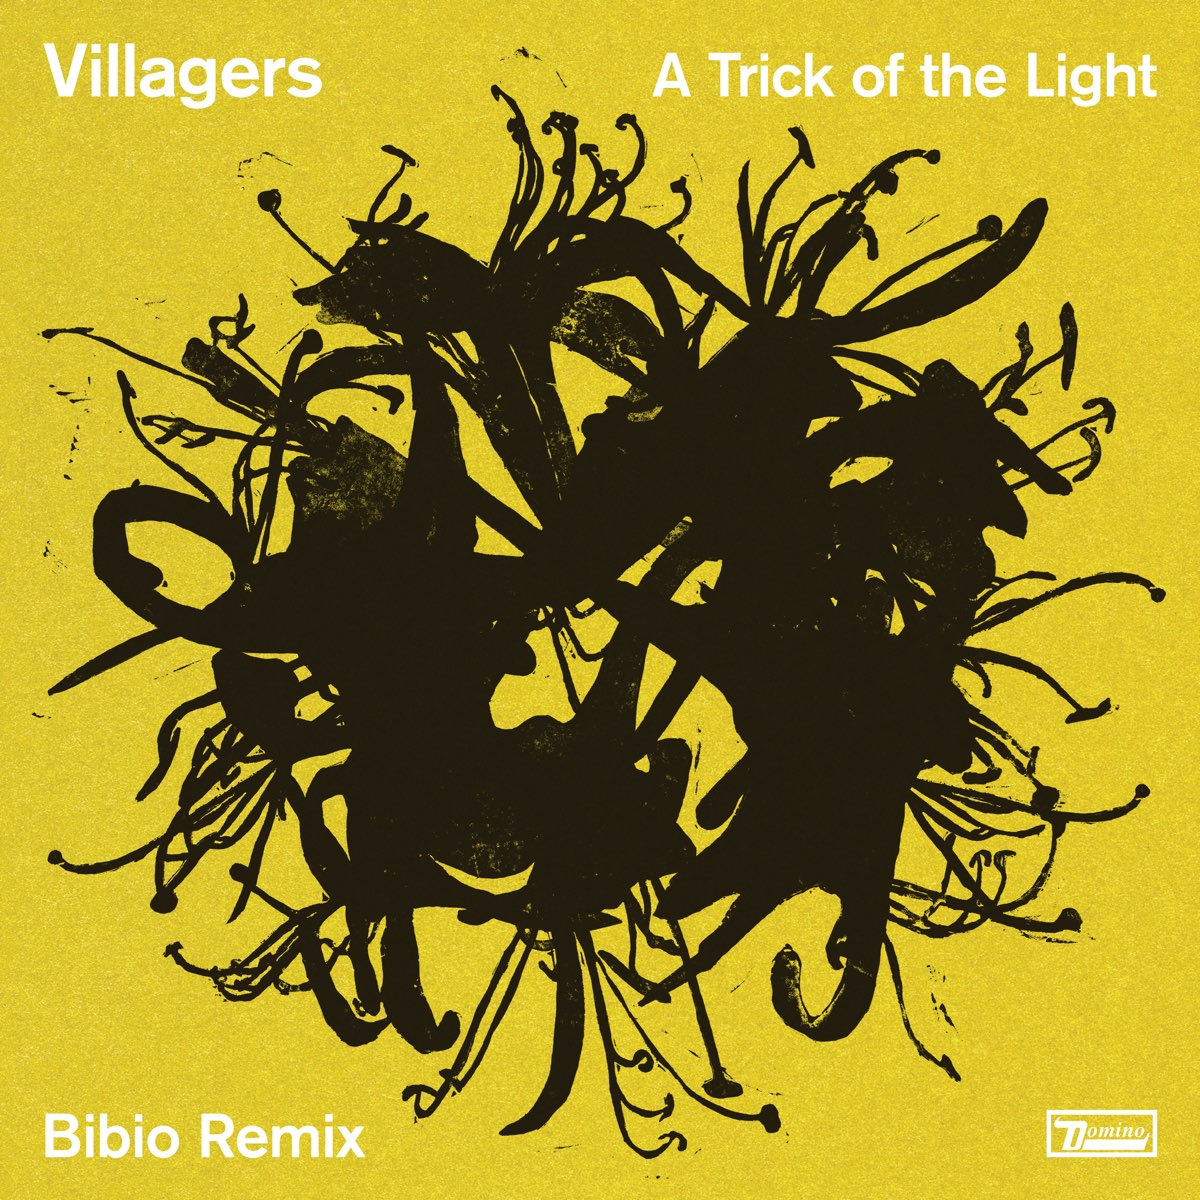 A Trick of the Light (Bibio Remix) - Single by Villagers on Apple Music